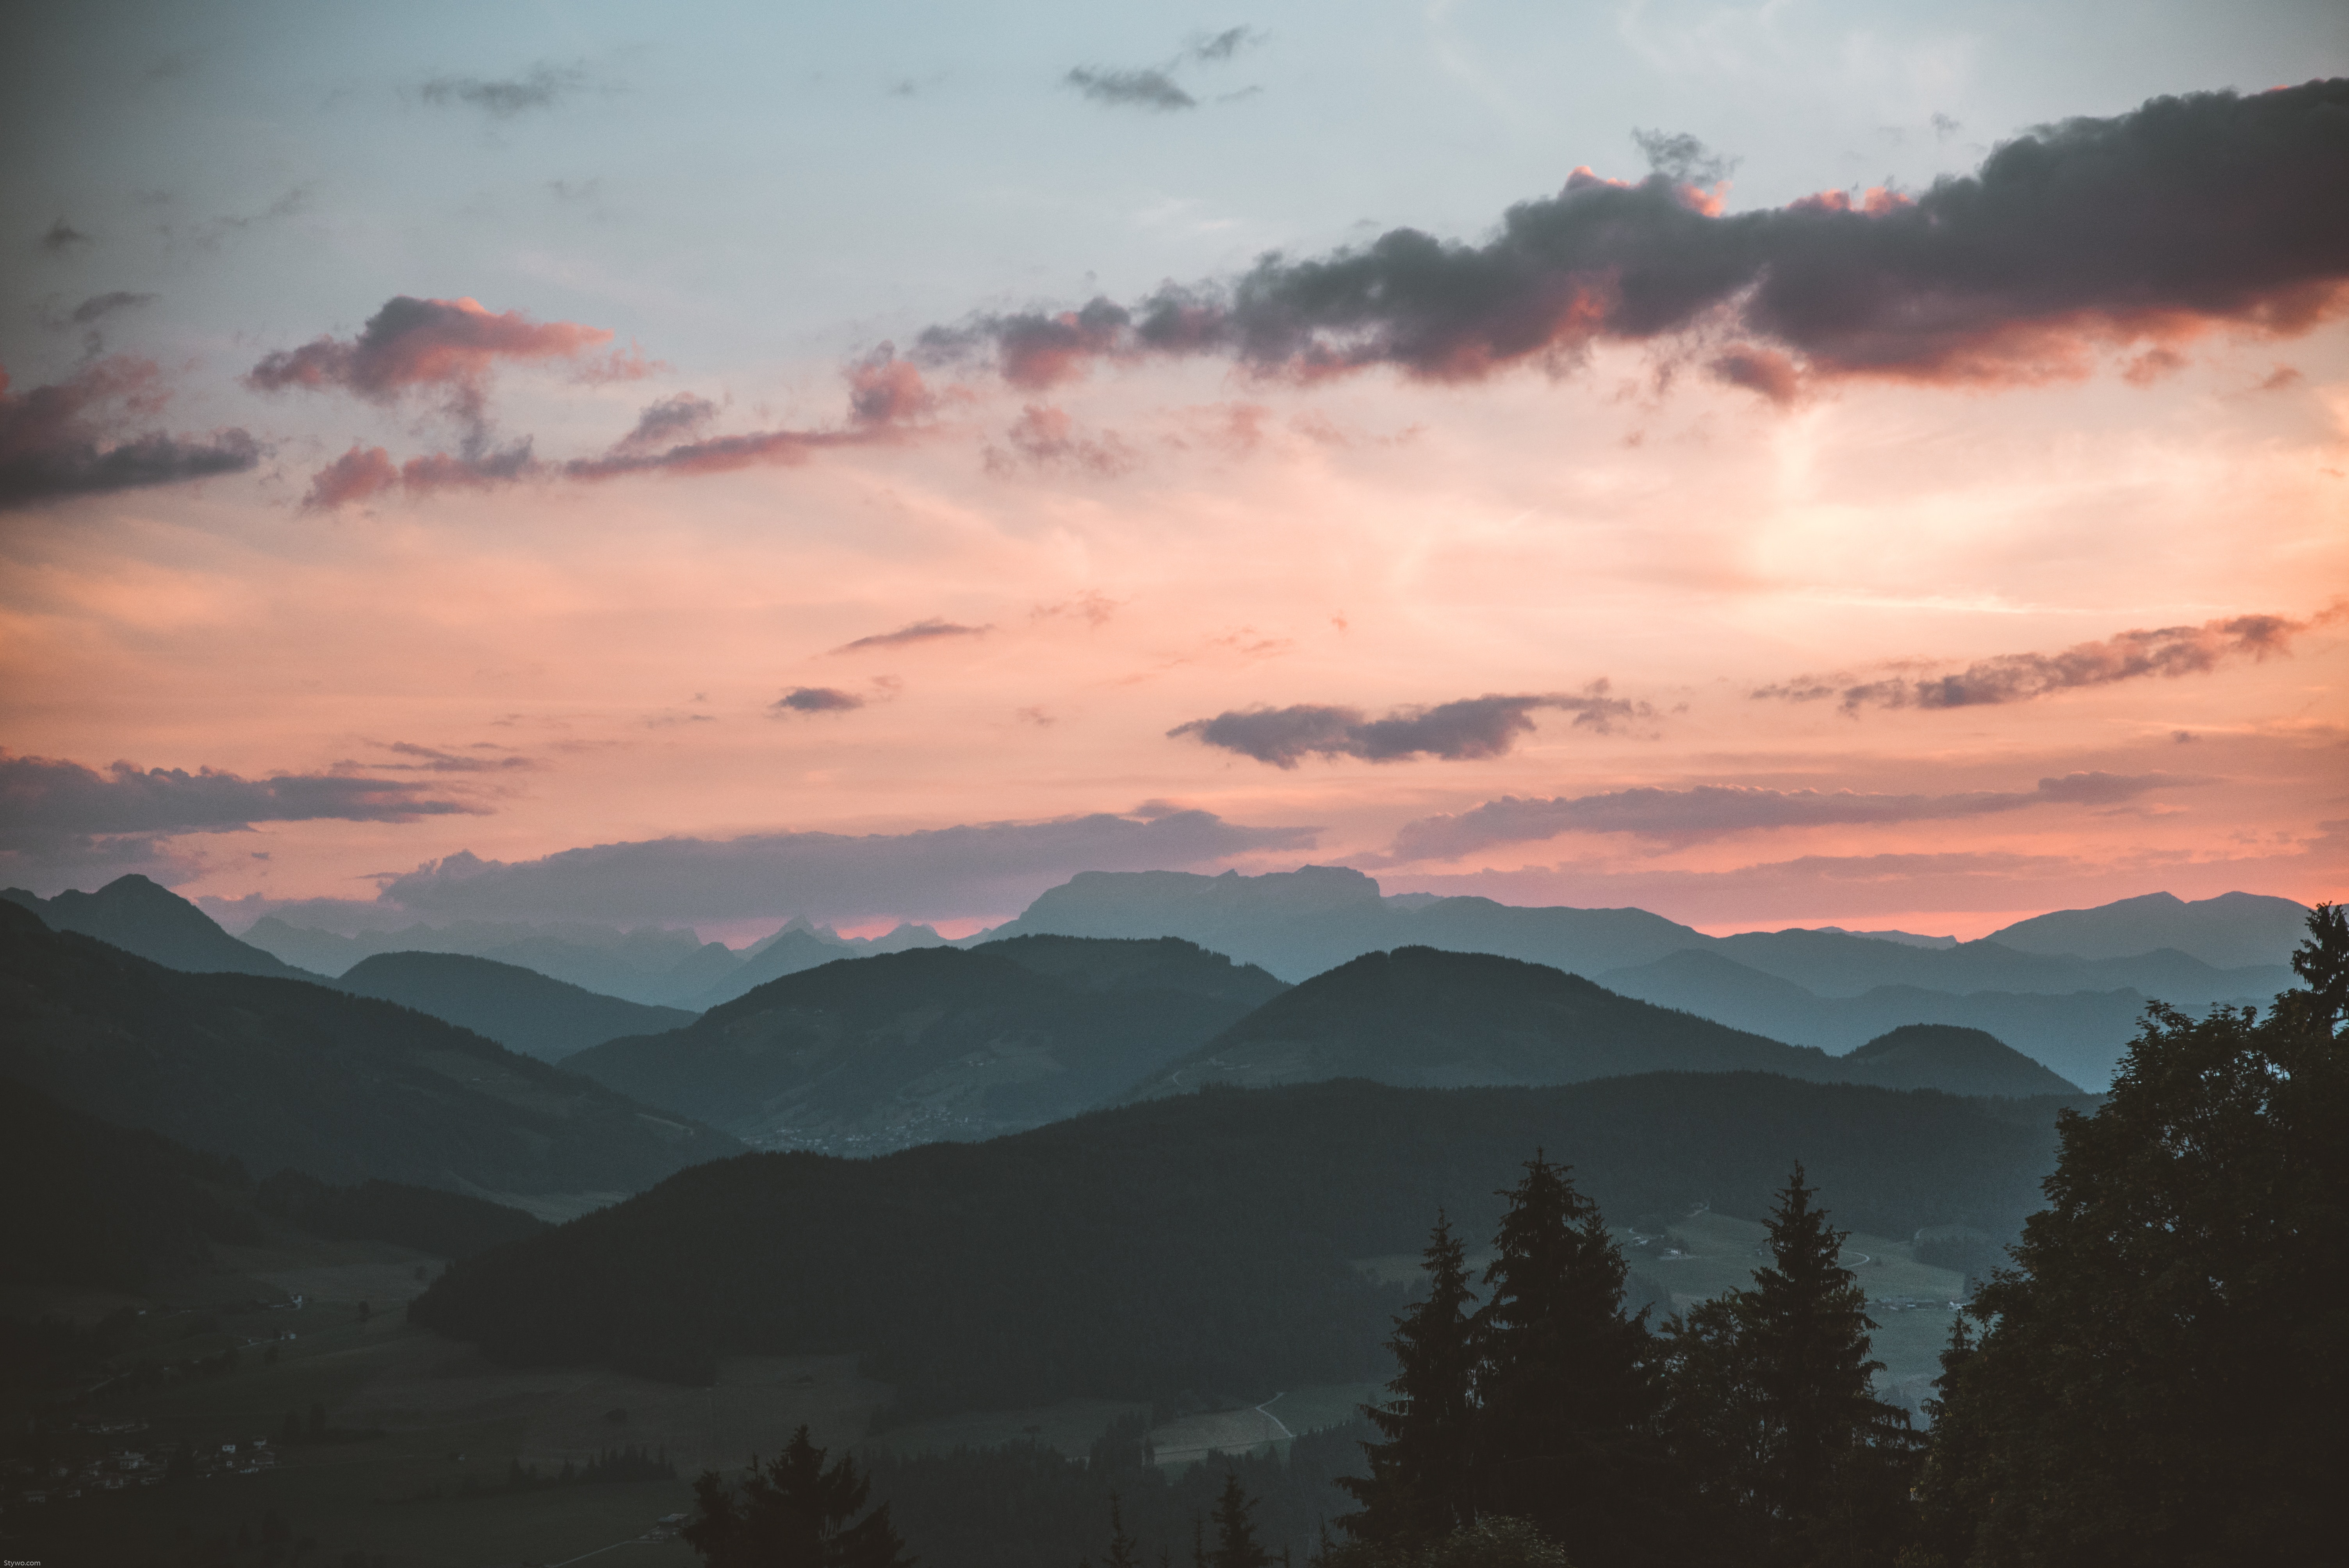 Mountain Chain Trees Sunset Glow Sky Sunset Clouds Mountains Nature Landscape 6016x4016